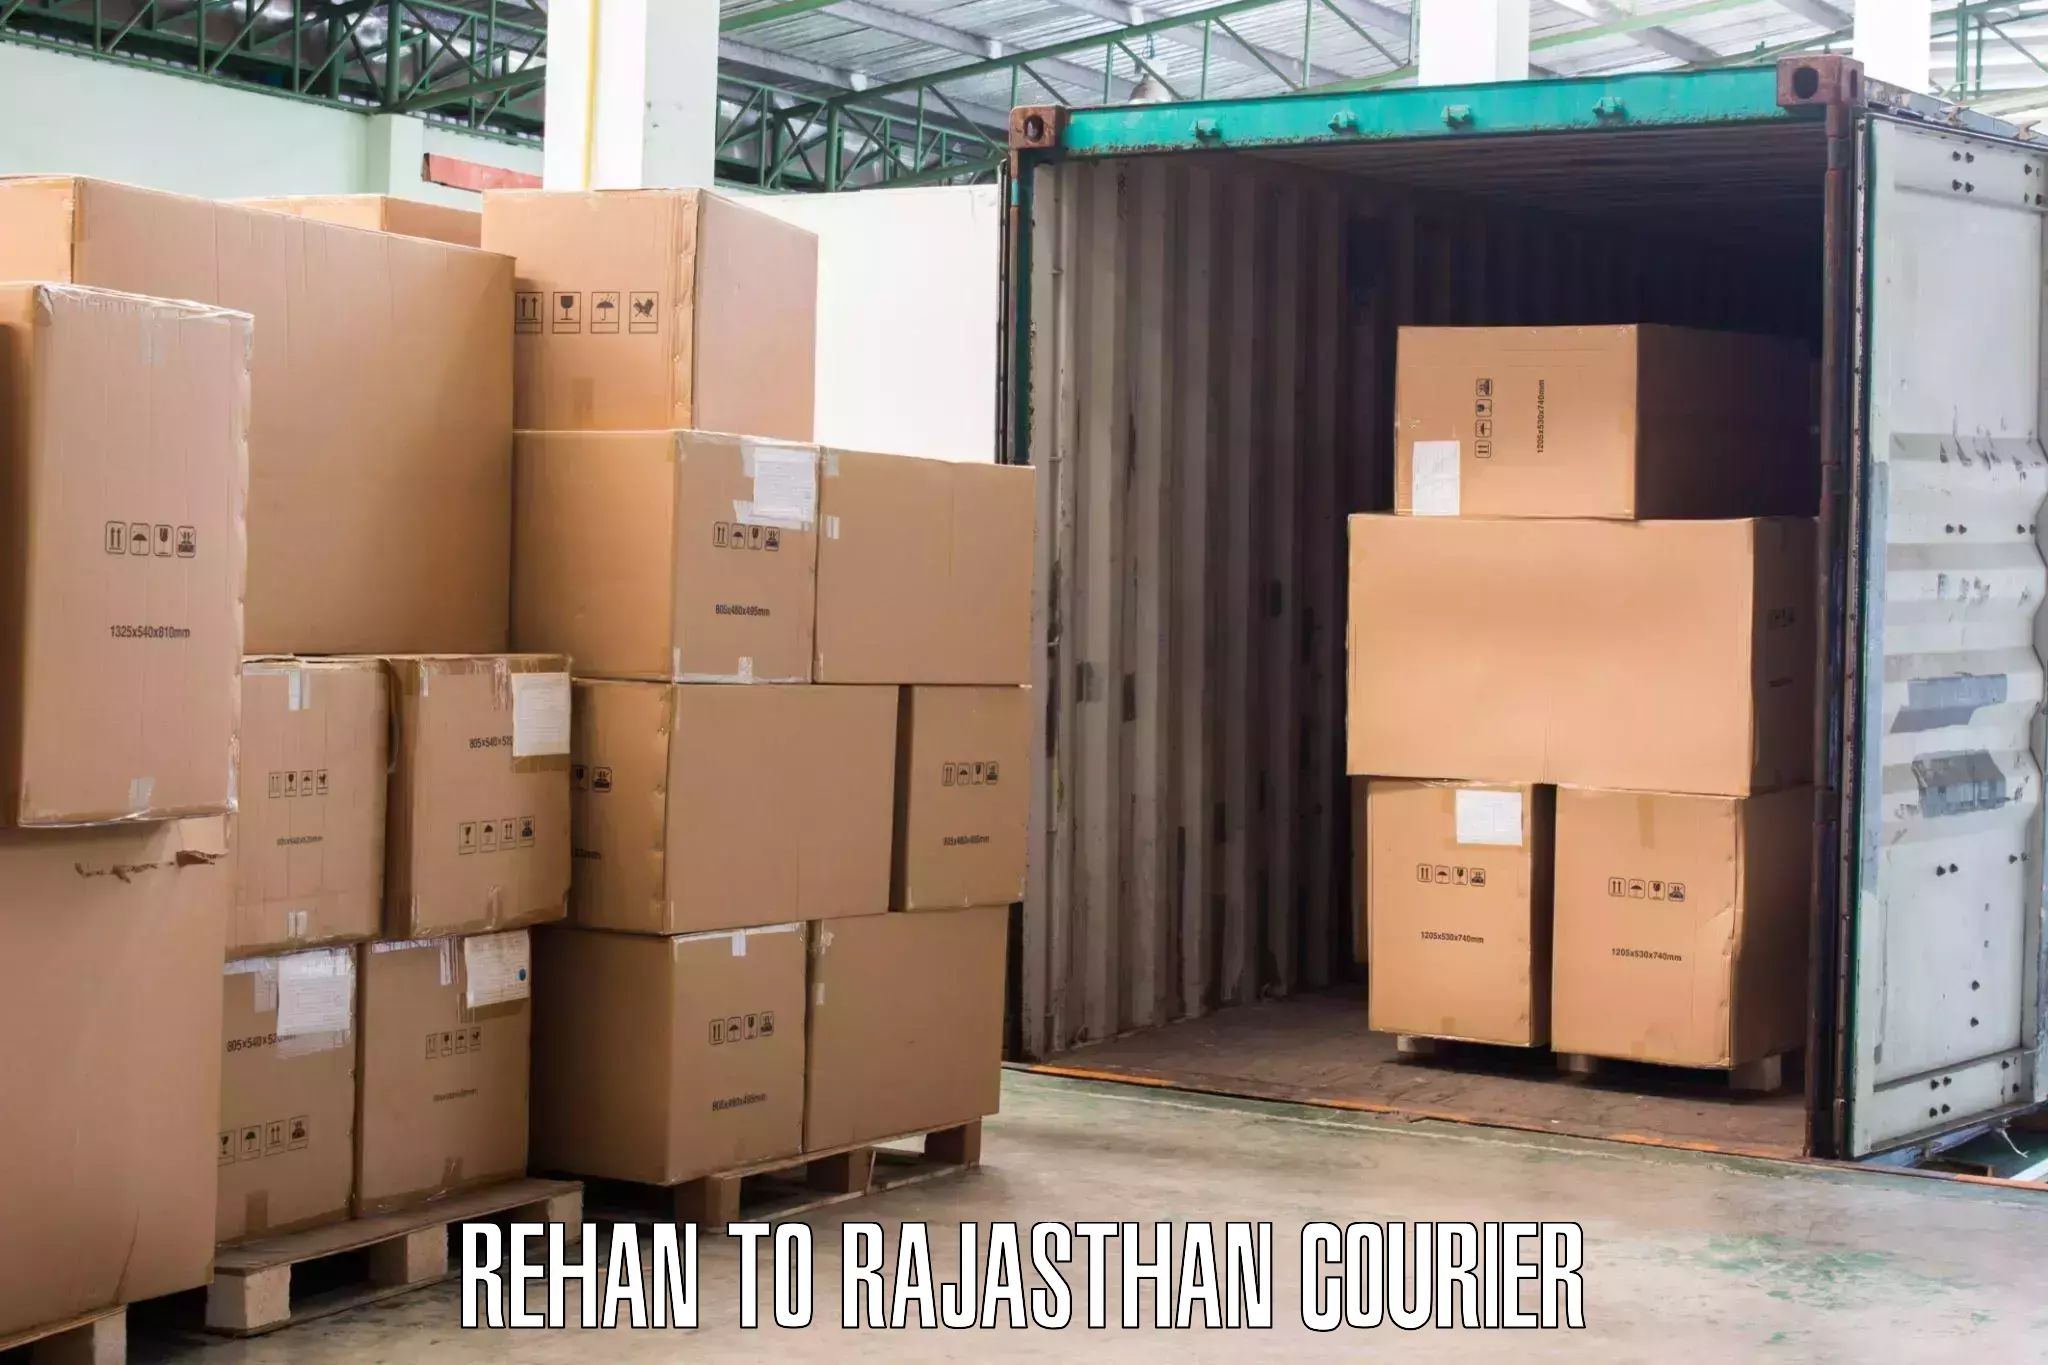 Reliable relocation services Rehan to Itawa